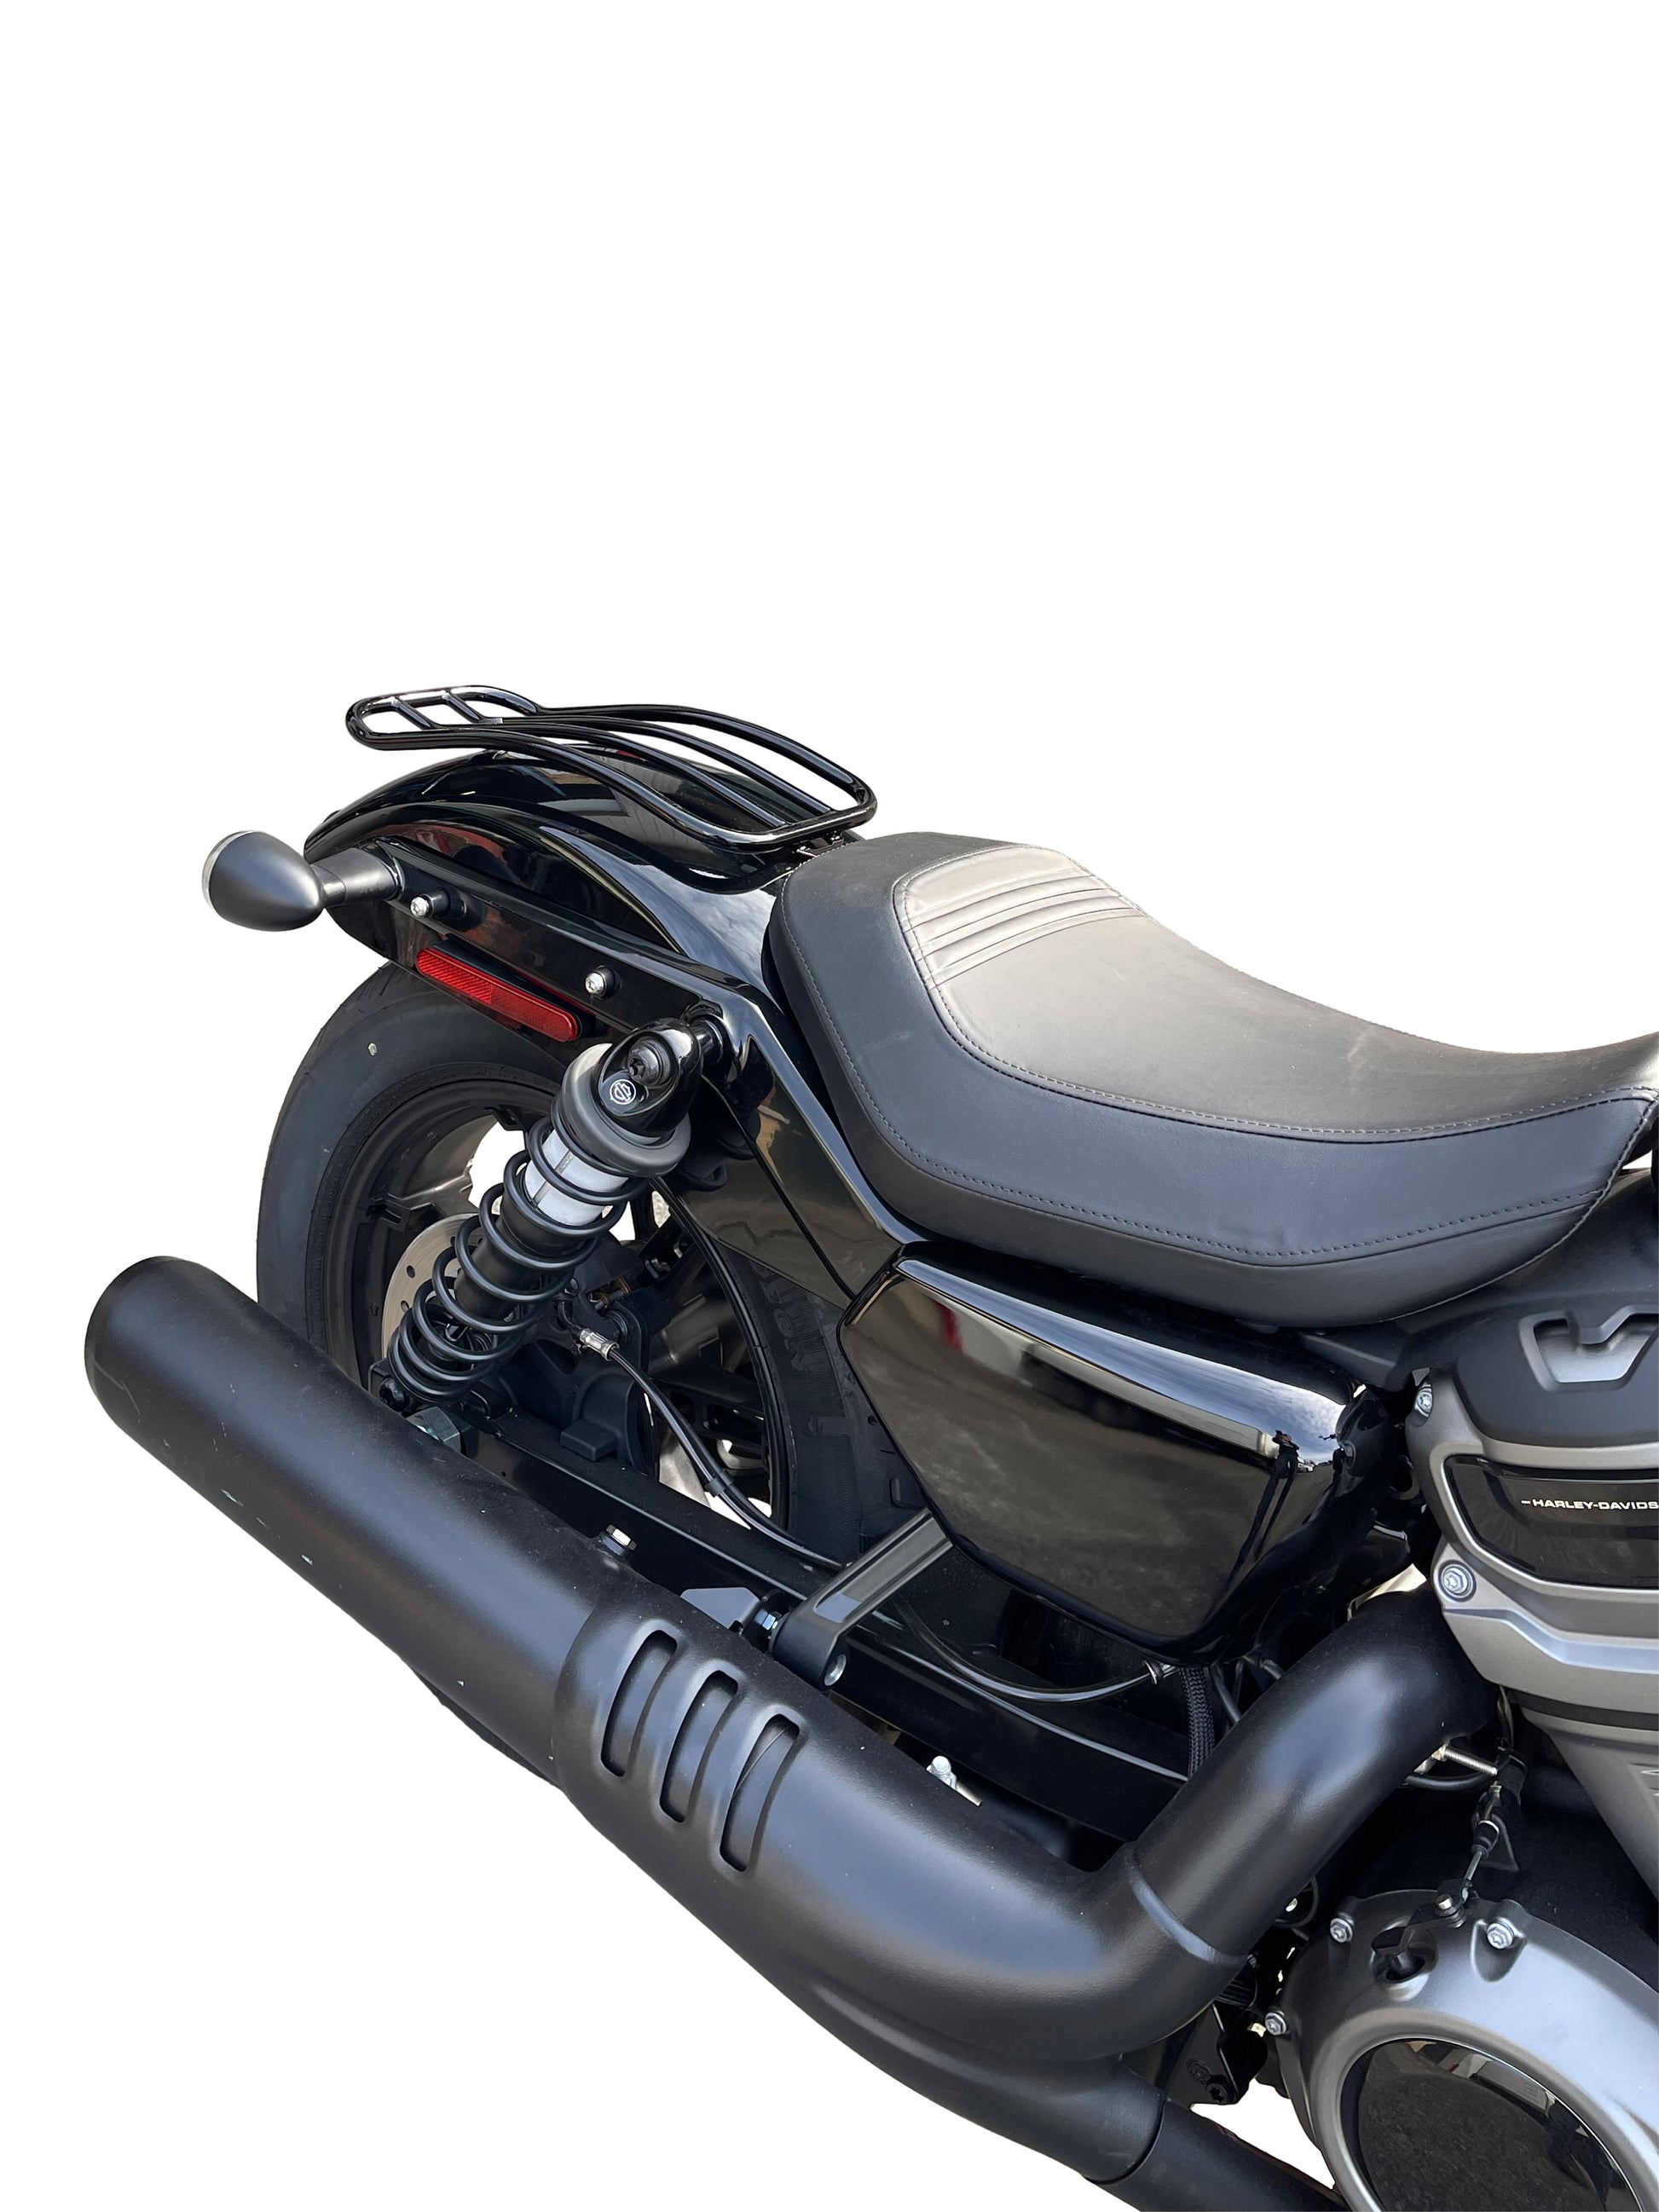 Solo Luggage Rack for your Harley Nightster RH975  MWL-227-GB